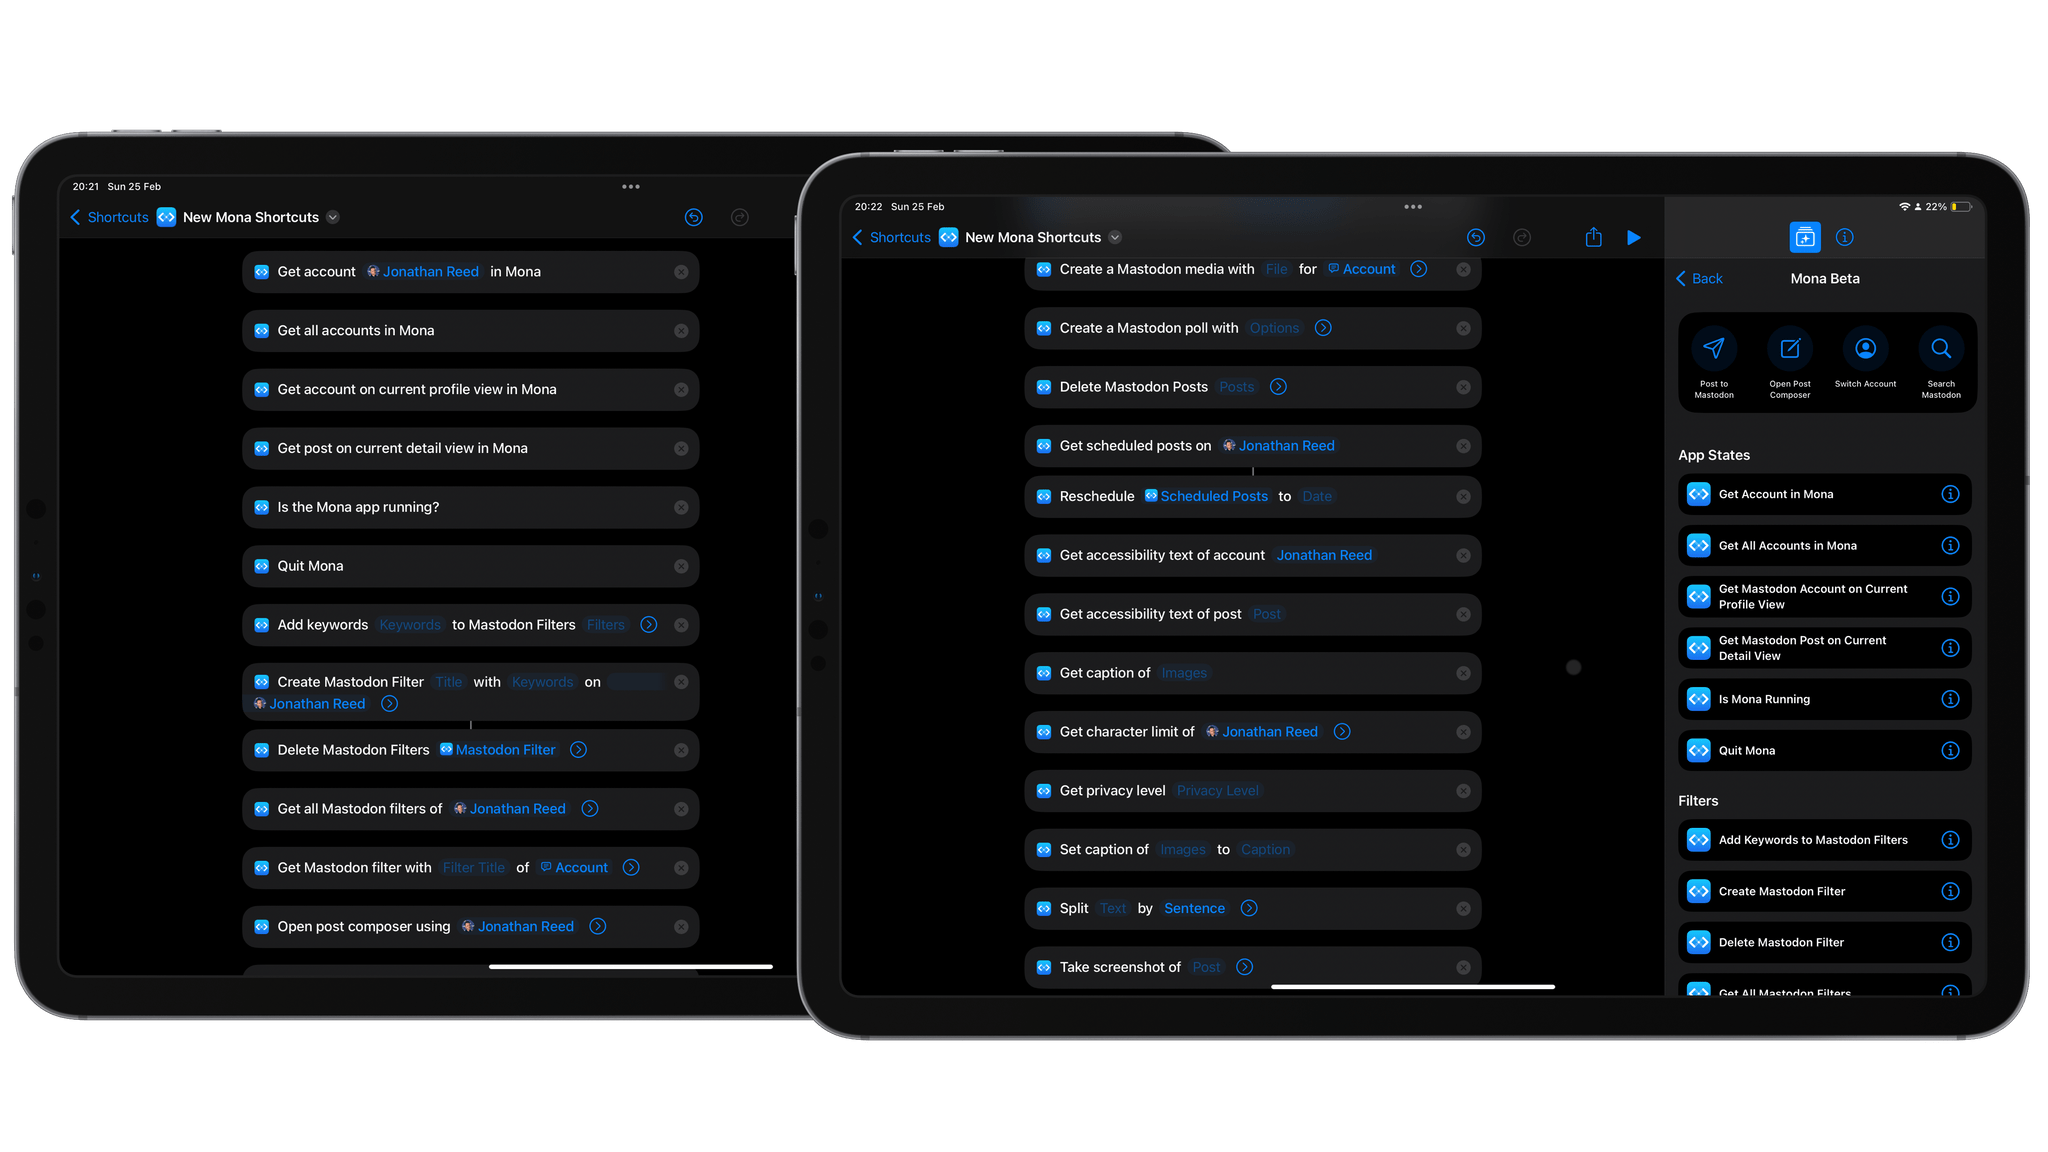 The full list of new Shortcuts actions in Mona 6.